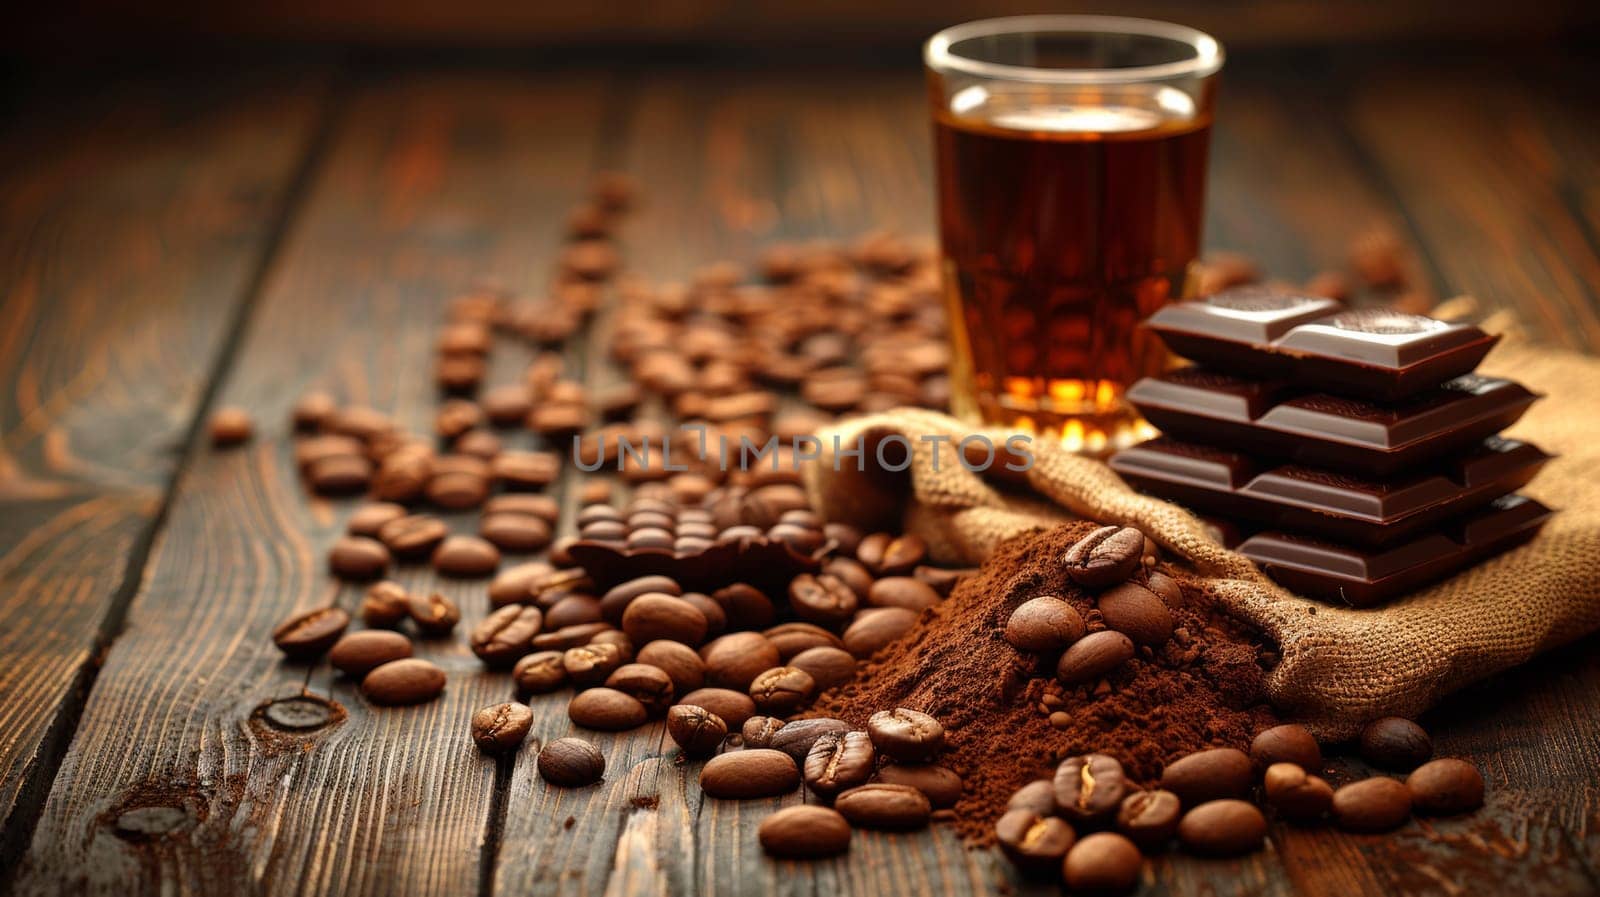 A glass of coffee and chocolate on a table with beans